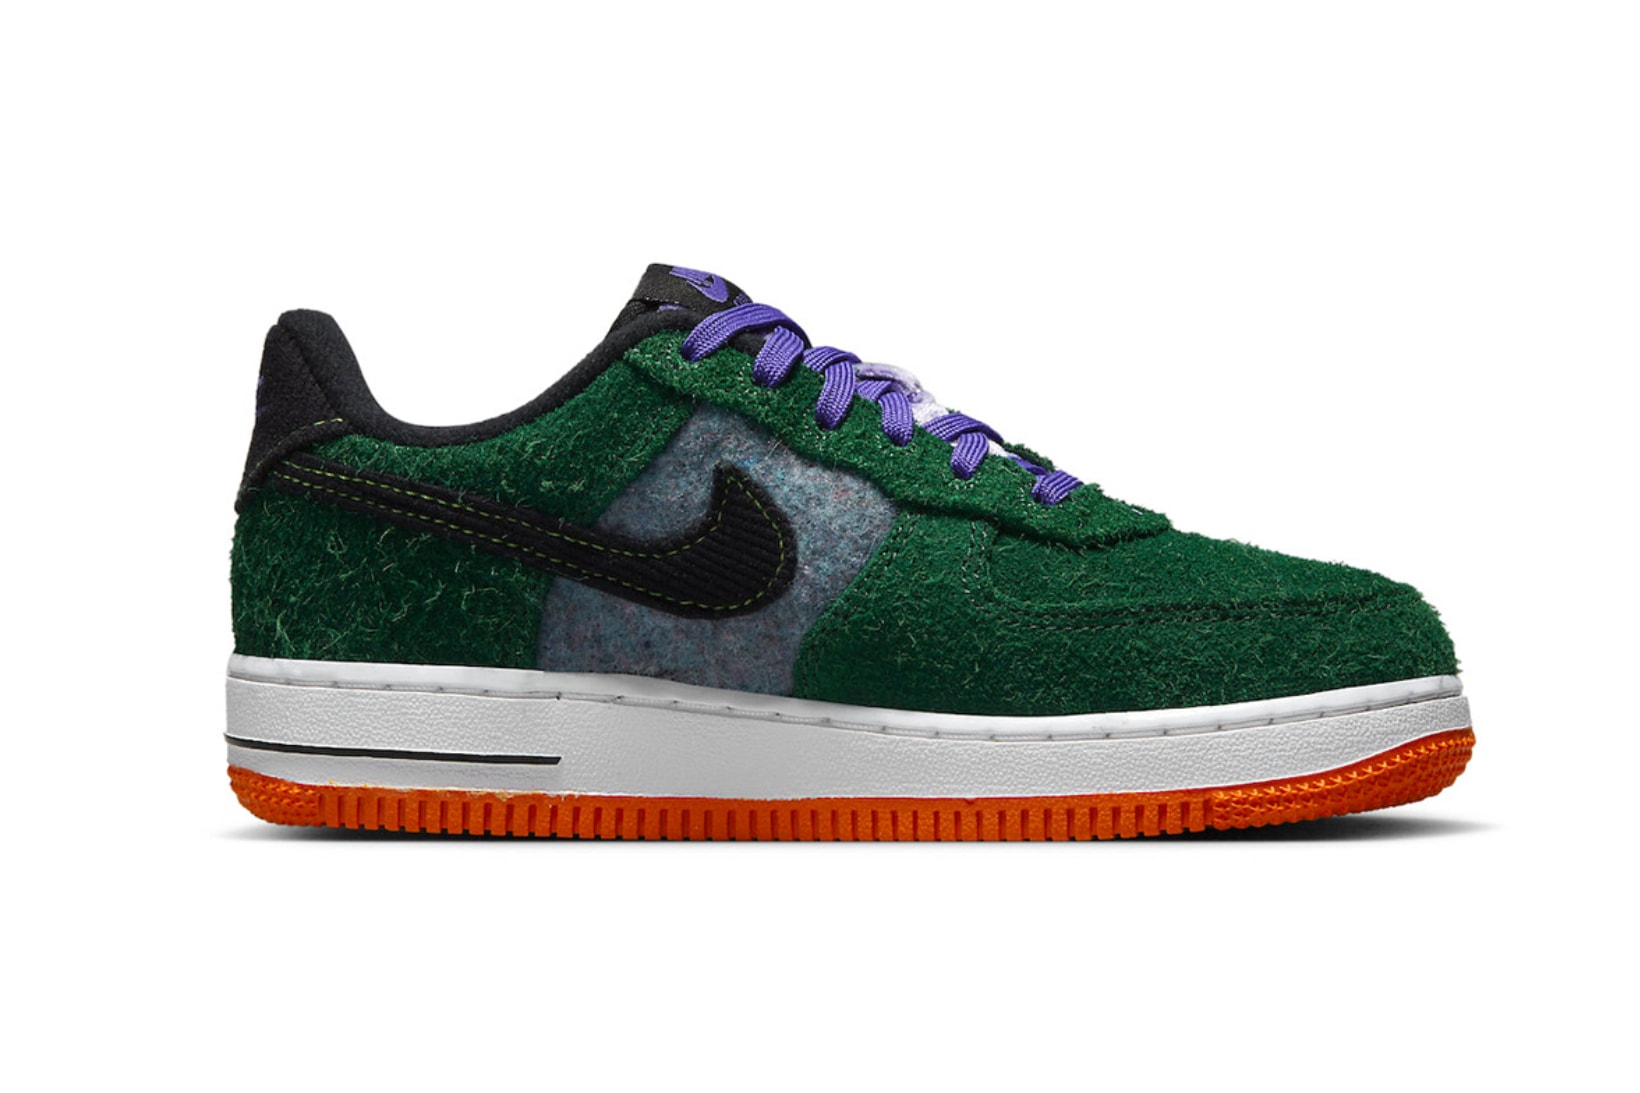 Nike Air Force 1 Low In "Shaggy Green Suede"